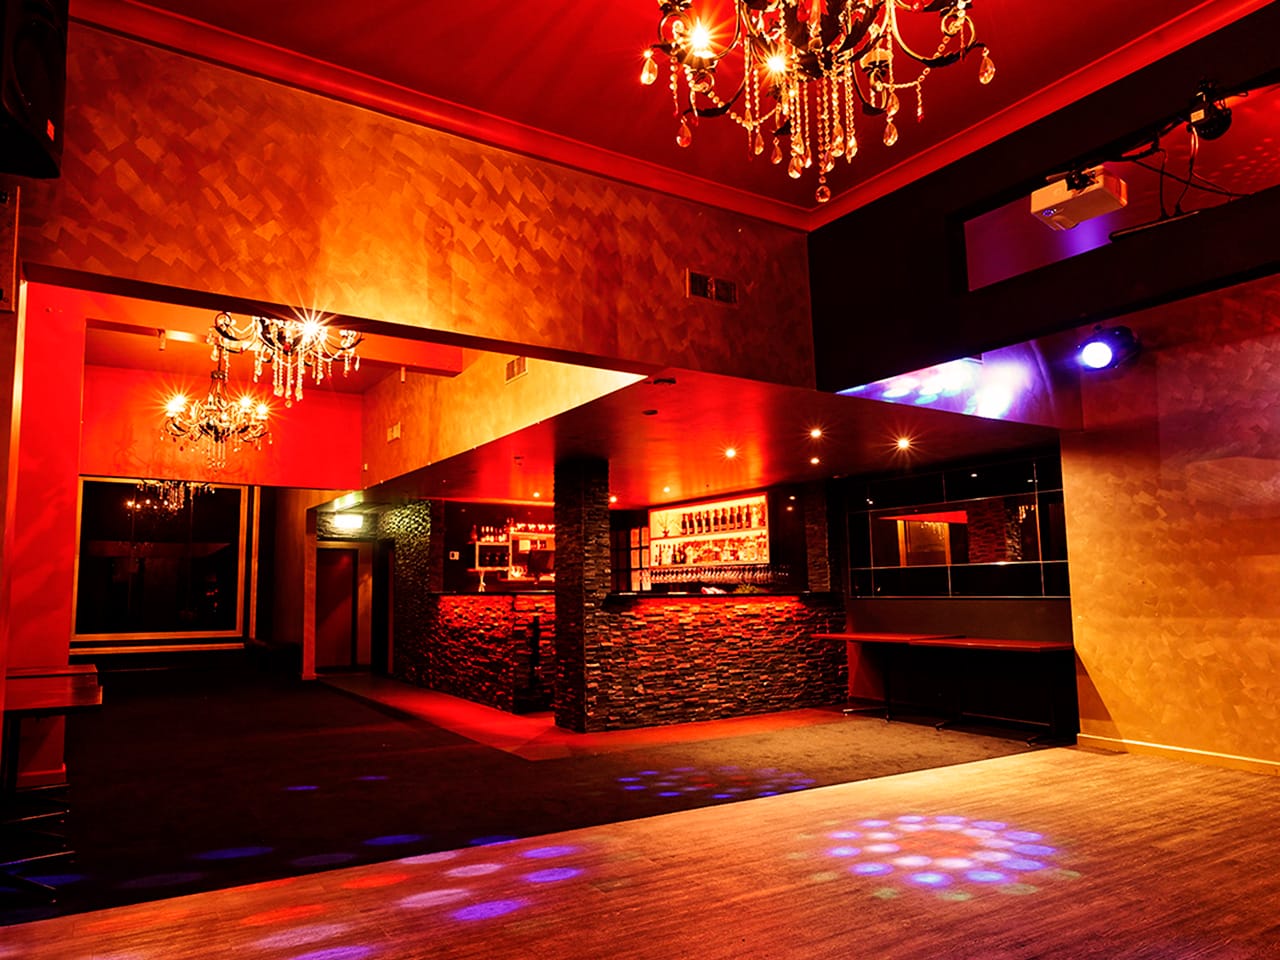 Empty Function Room With Chandelier In Red Lighting And A Dance Floor